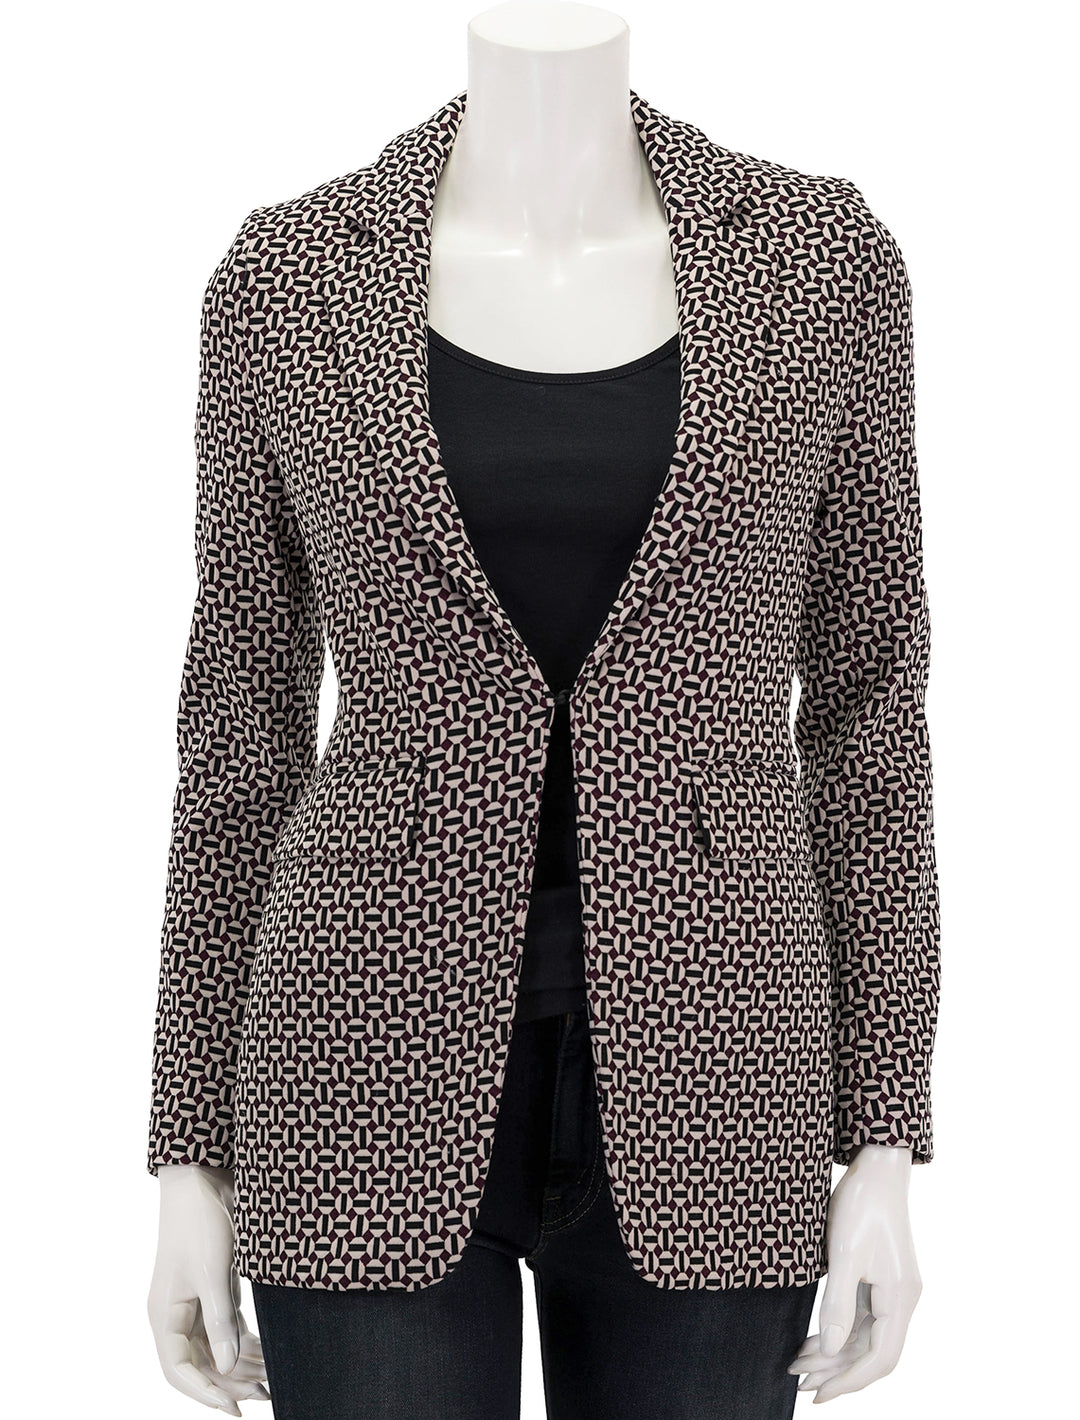 Front view of Vilagallo's andrea jacket in geometric bordeau, clasped.